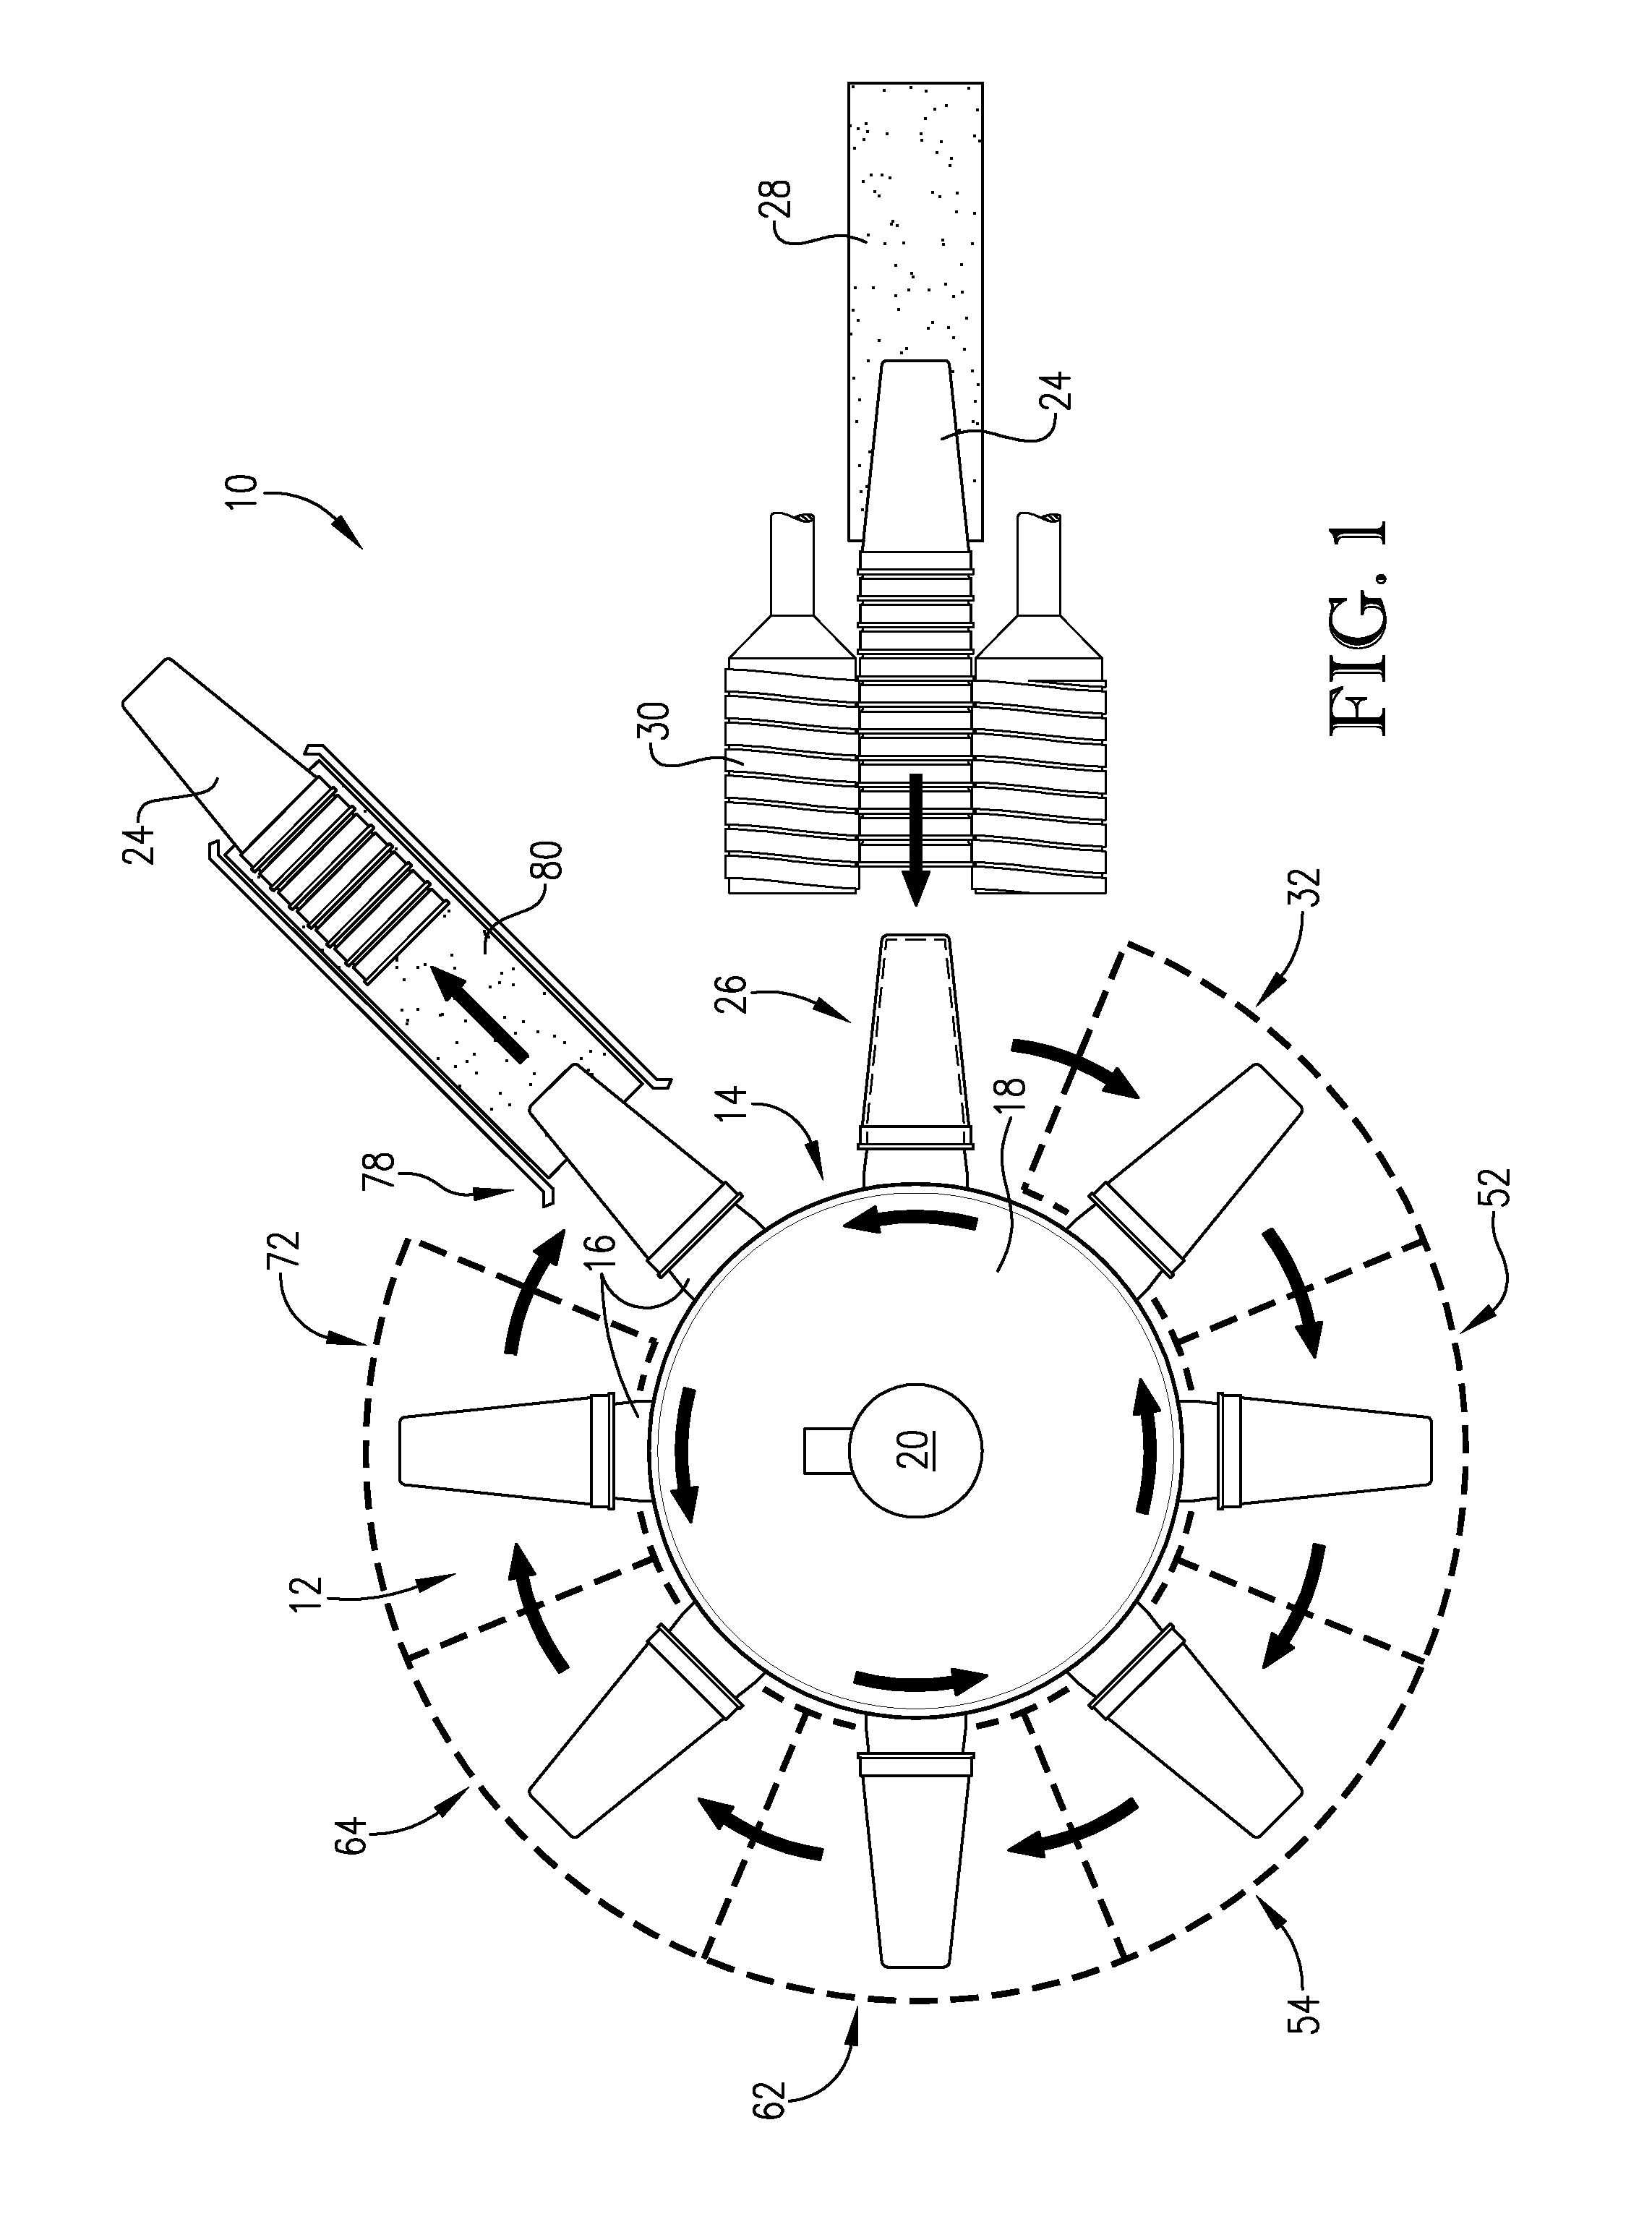 Apparatus and method for de-inking printed surfaces